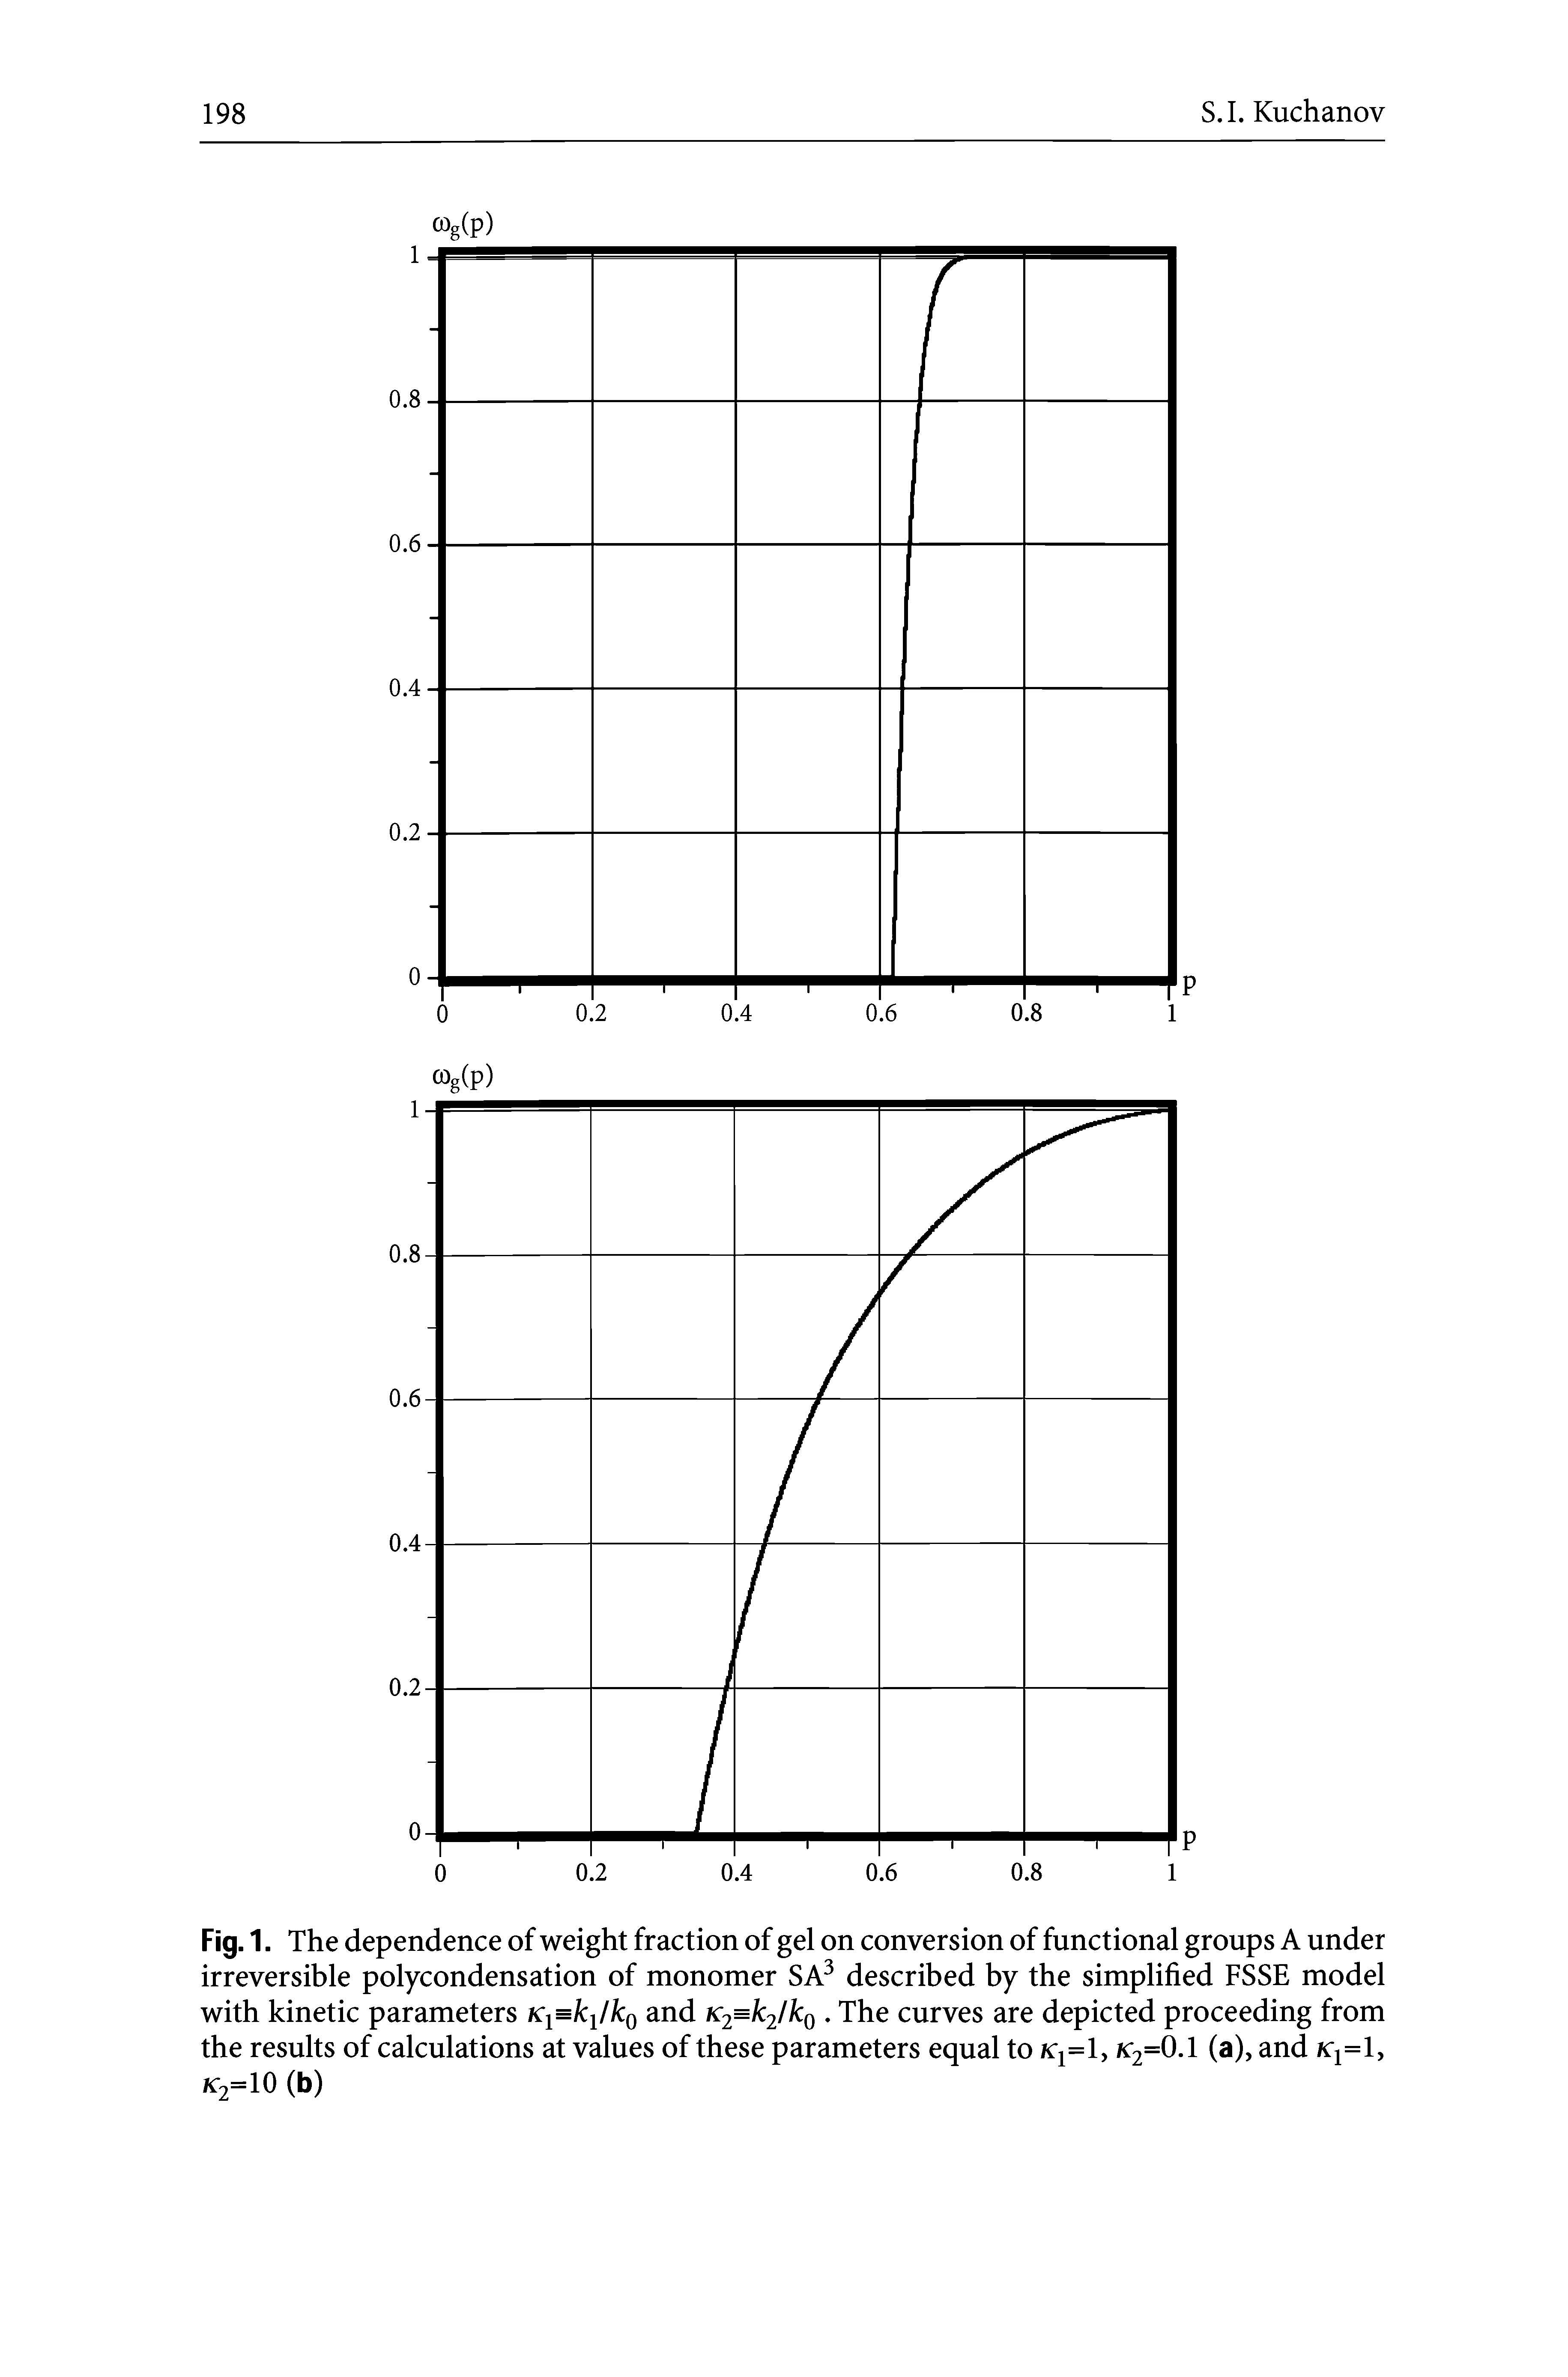 Fig. 1. The dependence of weight fraction of gel on conversion of functional groups A under irreversible polycondensation of monomer SA3 described by the simplified FSSE model with kinetic parameters K k k0 and K2=k2/k0. The curves are depicted proceeding from the results of calculations at values of these parameters equal to kx=1, k2=0.1 (a), and kx=1, 2=10 (b)...